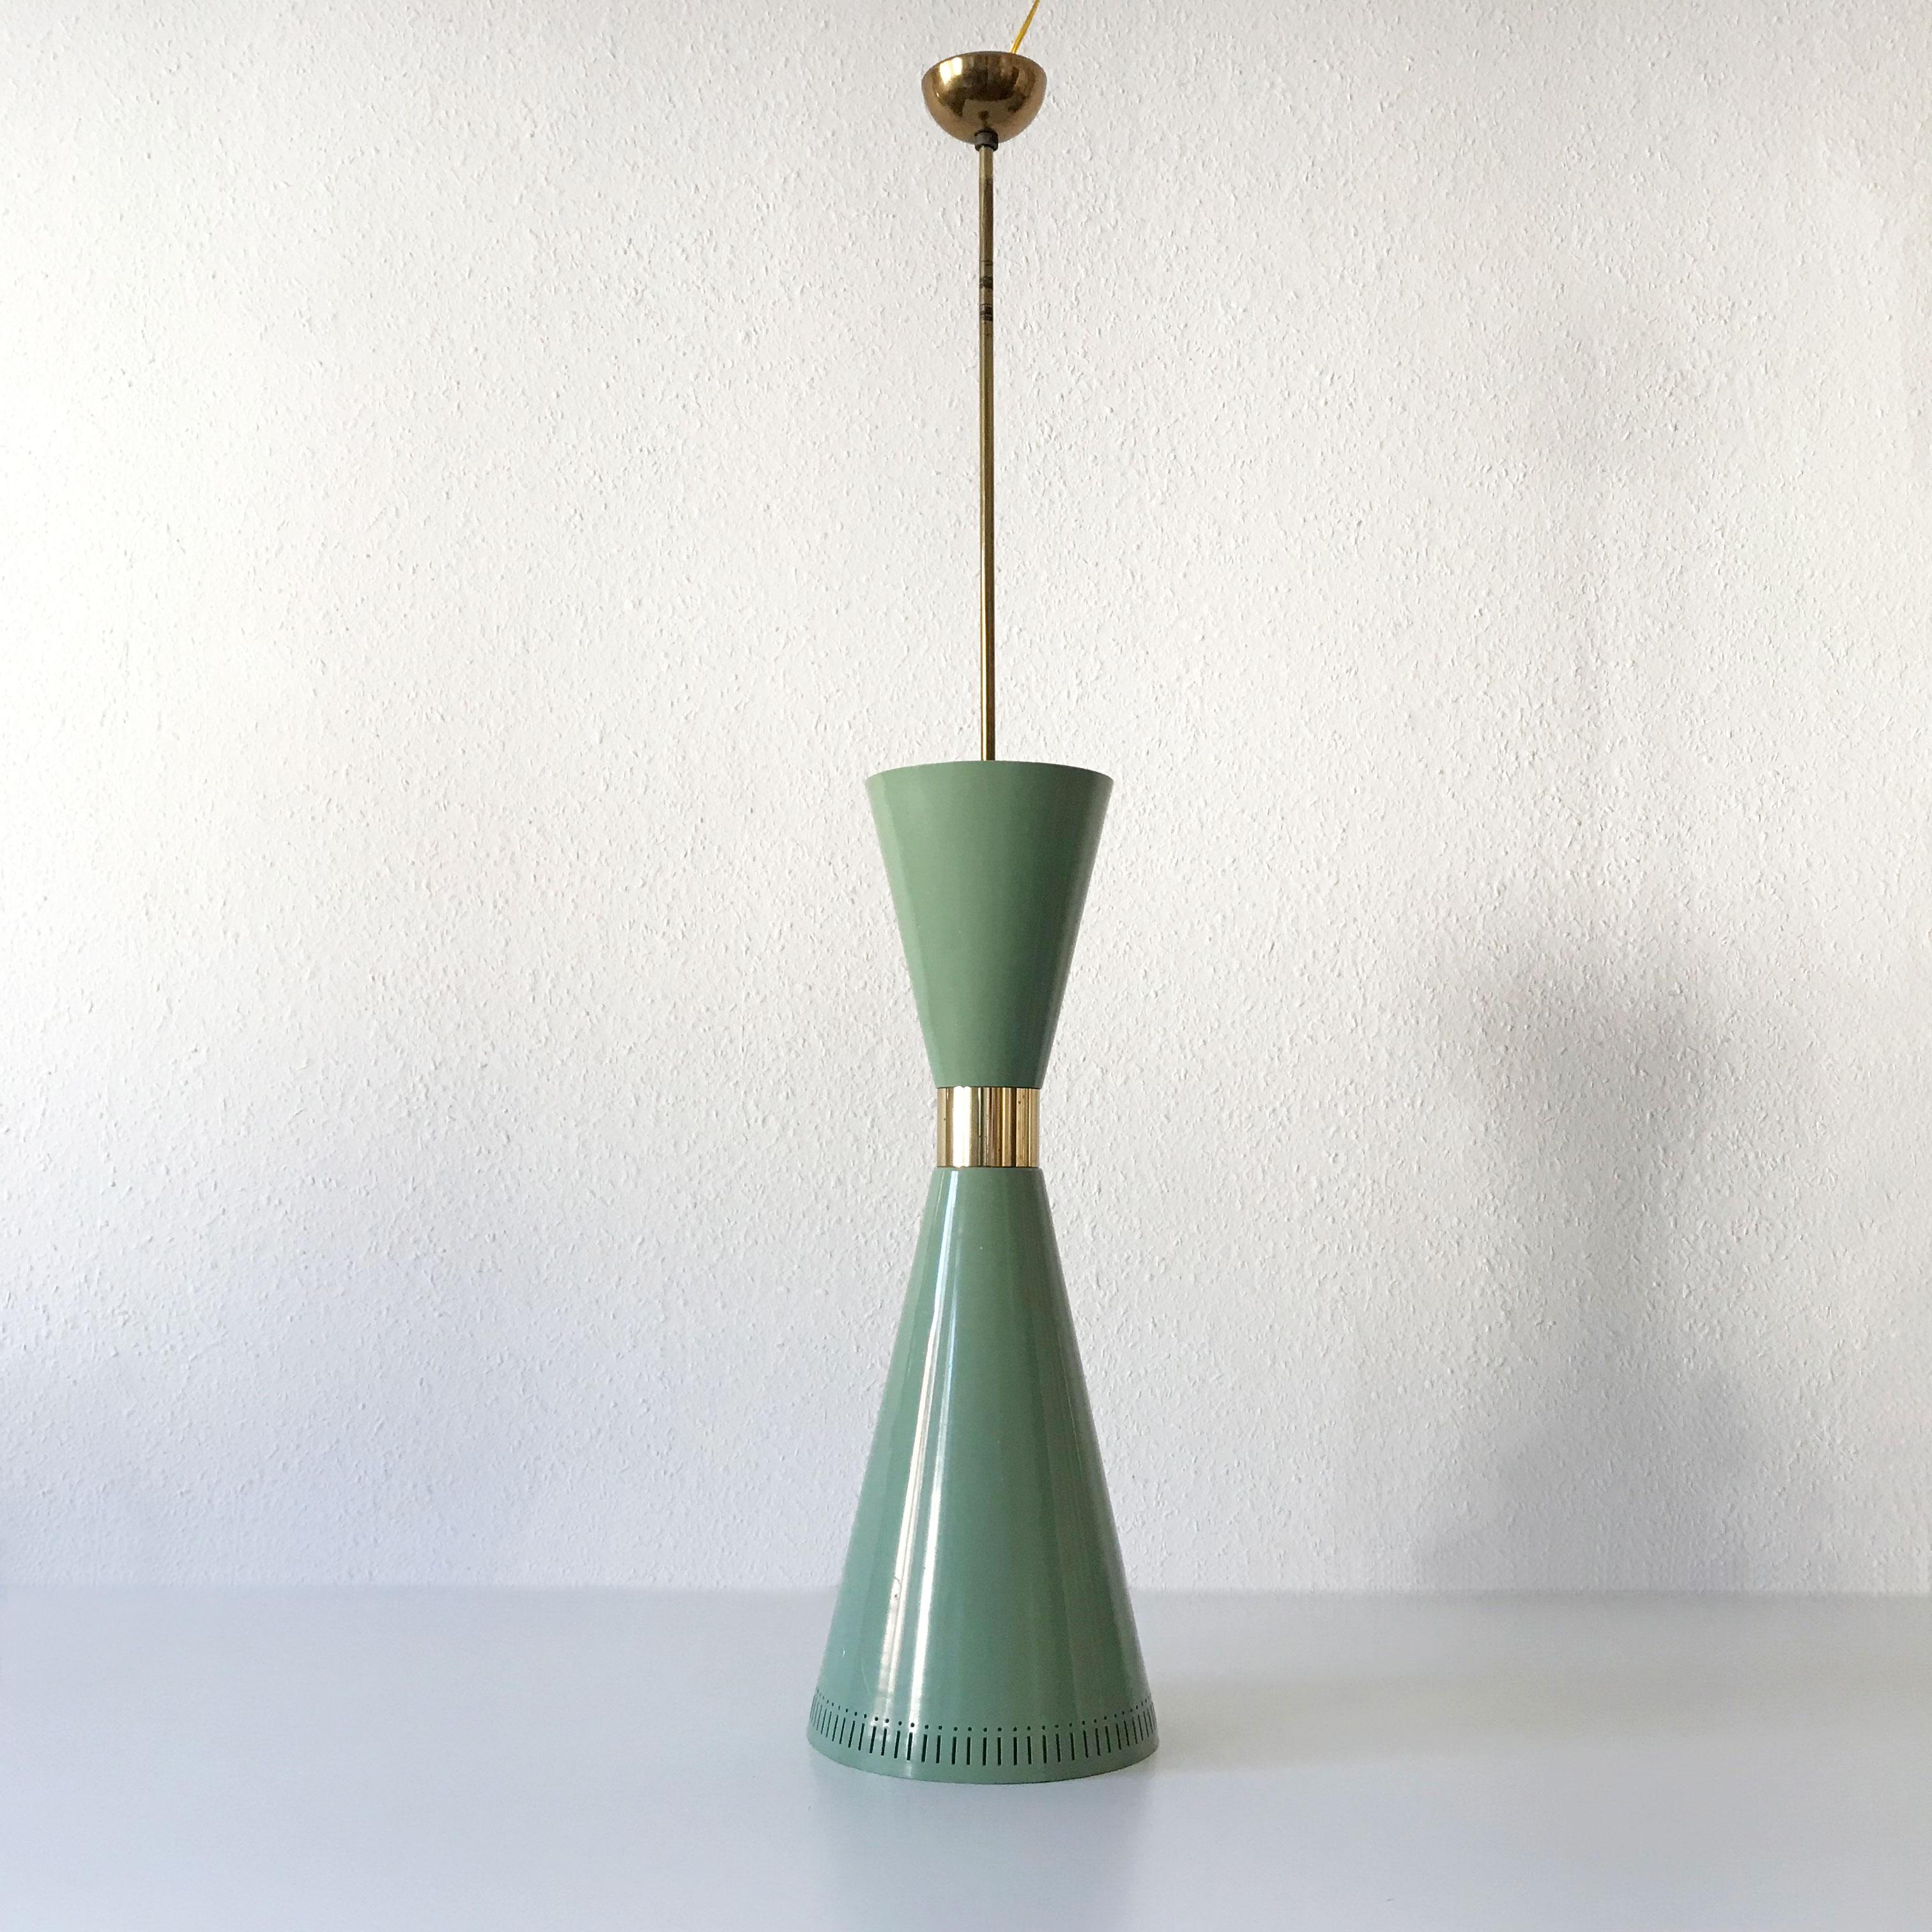 Exceptional Mid-Century Modern Large Diabolo Pendant Lamp by BAG Turgi, 1950s 8